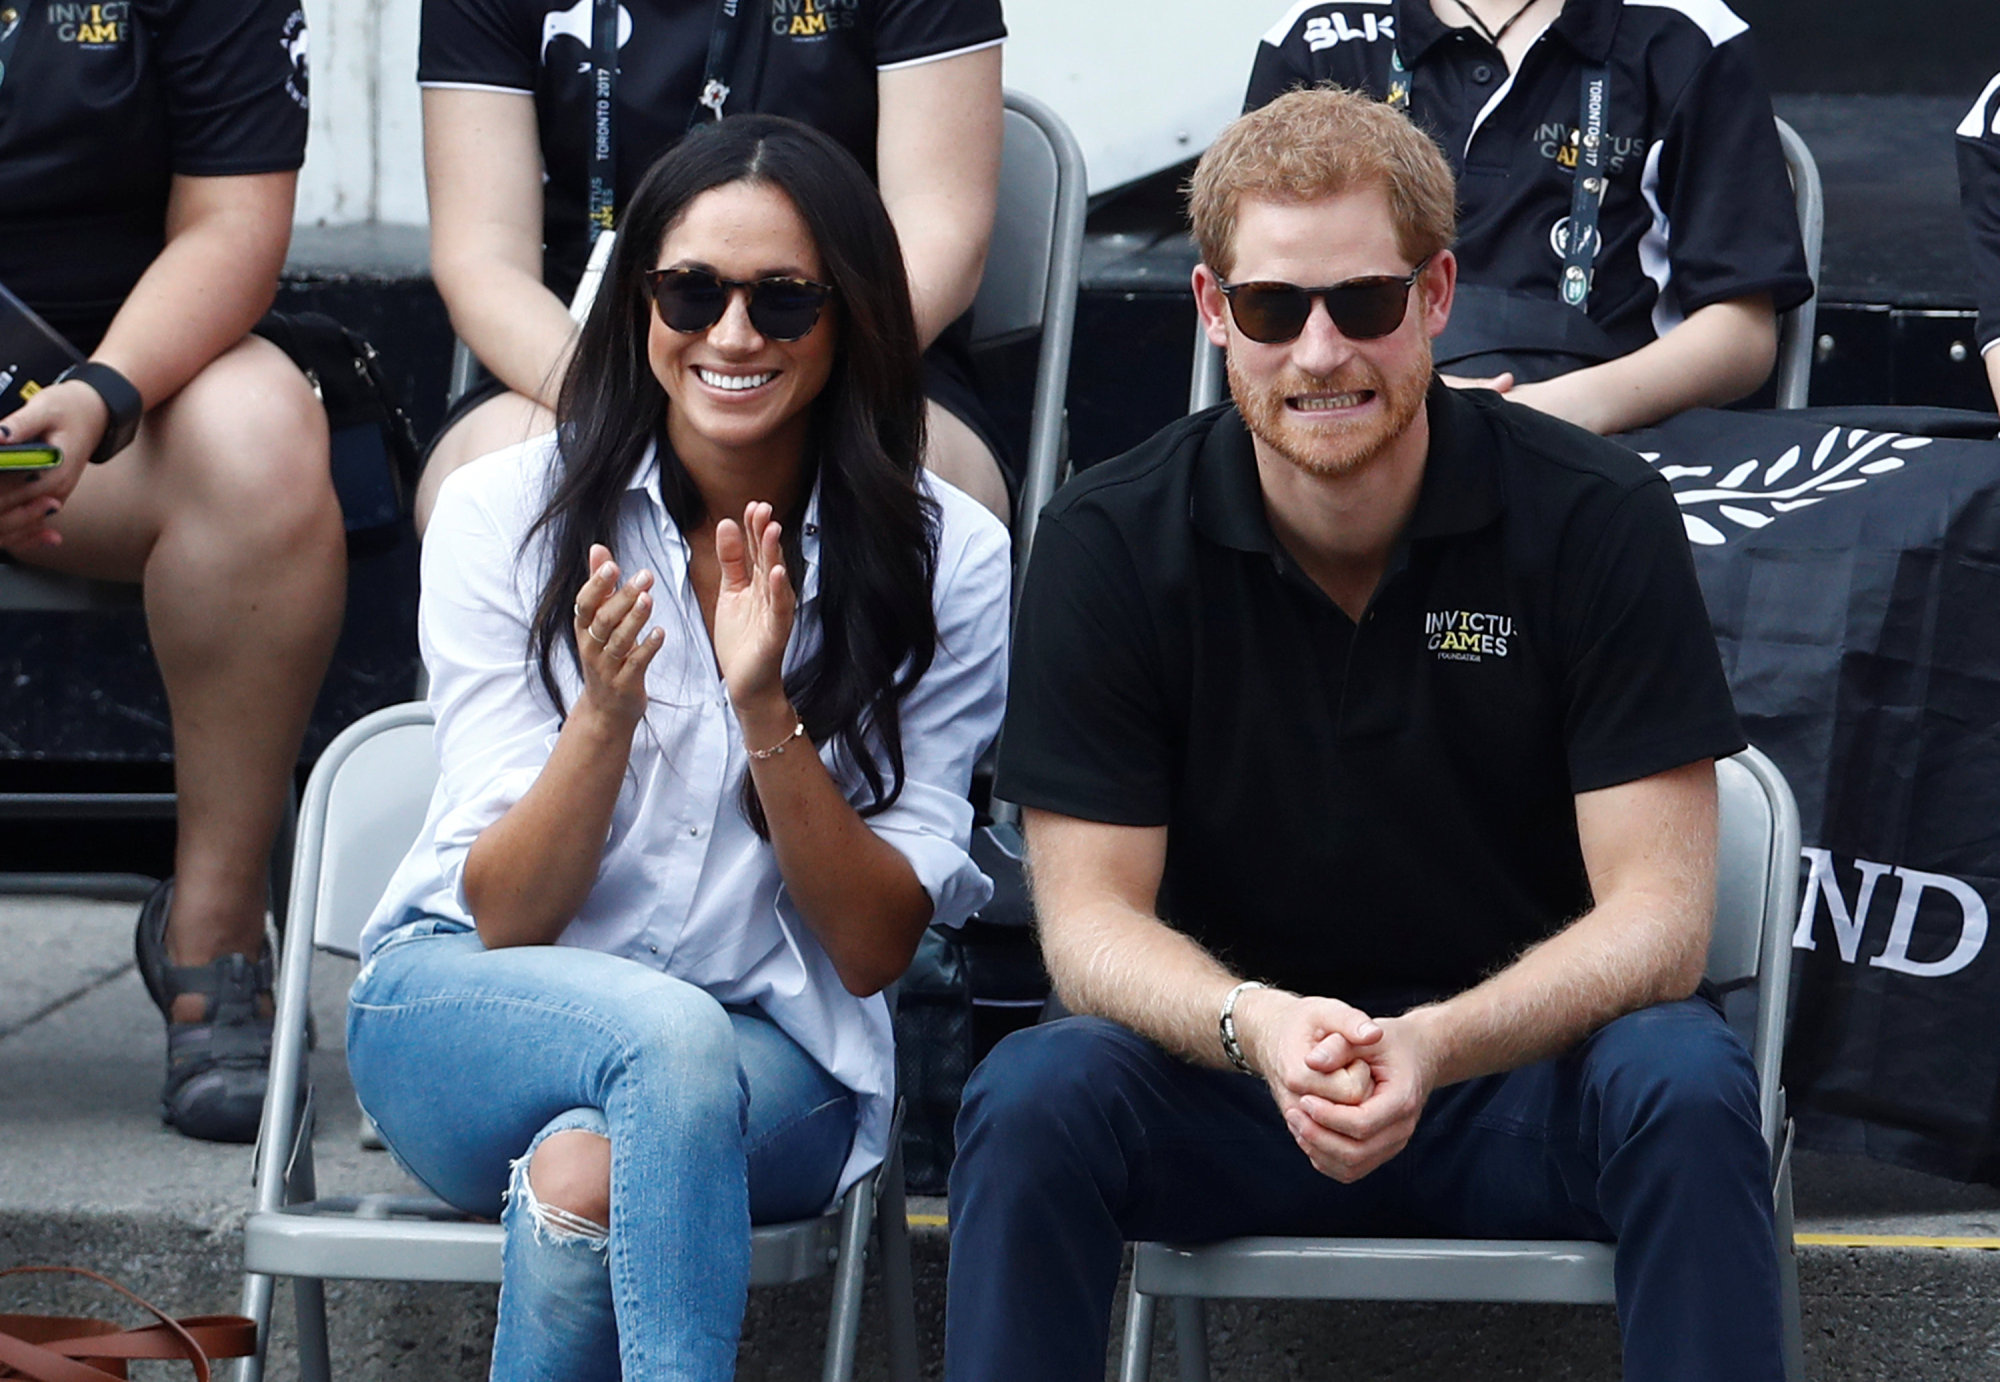 Prince Harry makes first formal public appearance with girlfriend, taking in Invictus Games